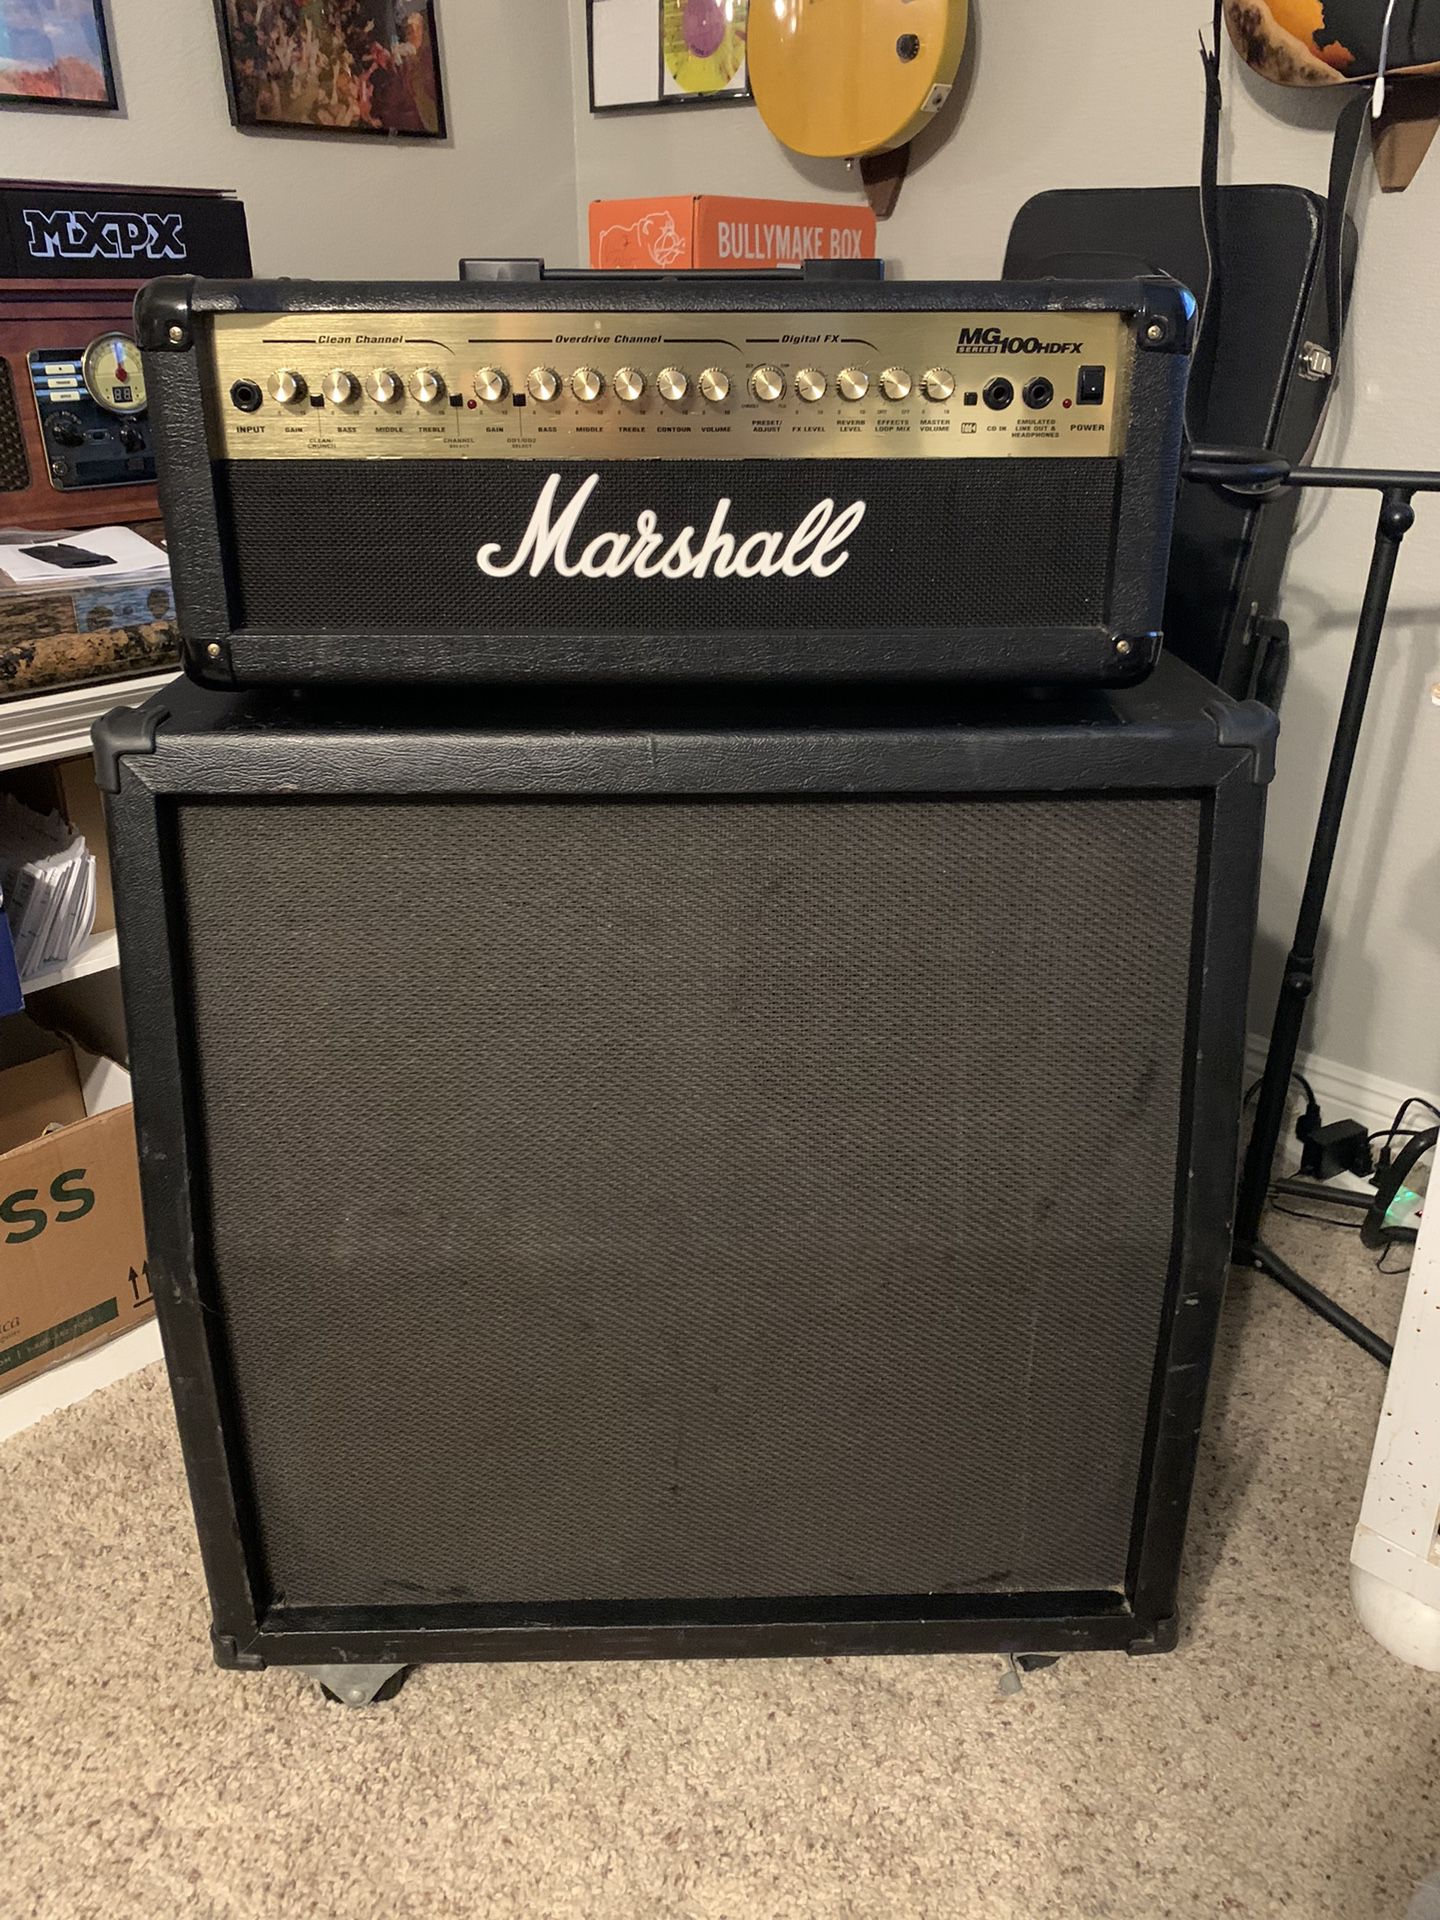 Marshall MG100HDFX Amplifier / Amp Head w/ ROHS 4X10 Speaker Cab Electric Guitar Half Stack - Sweet!